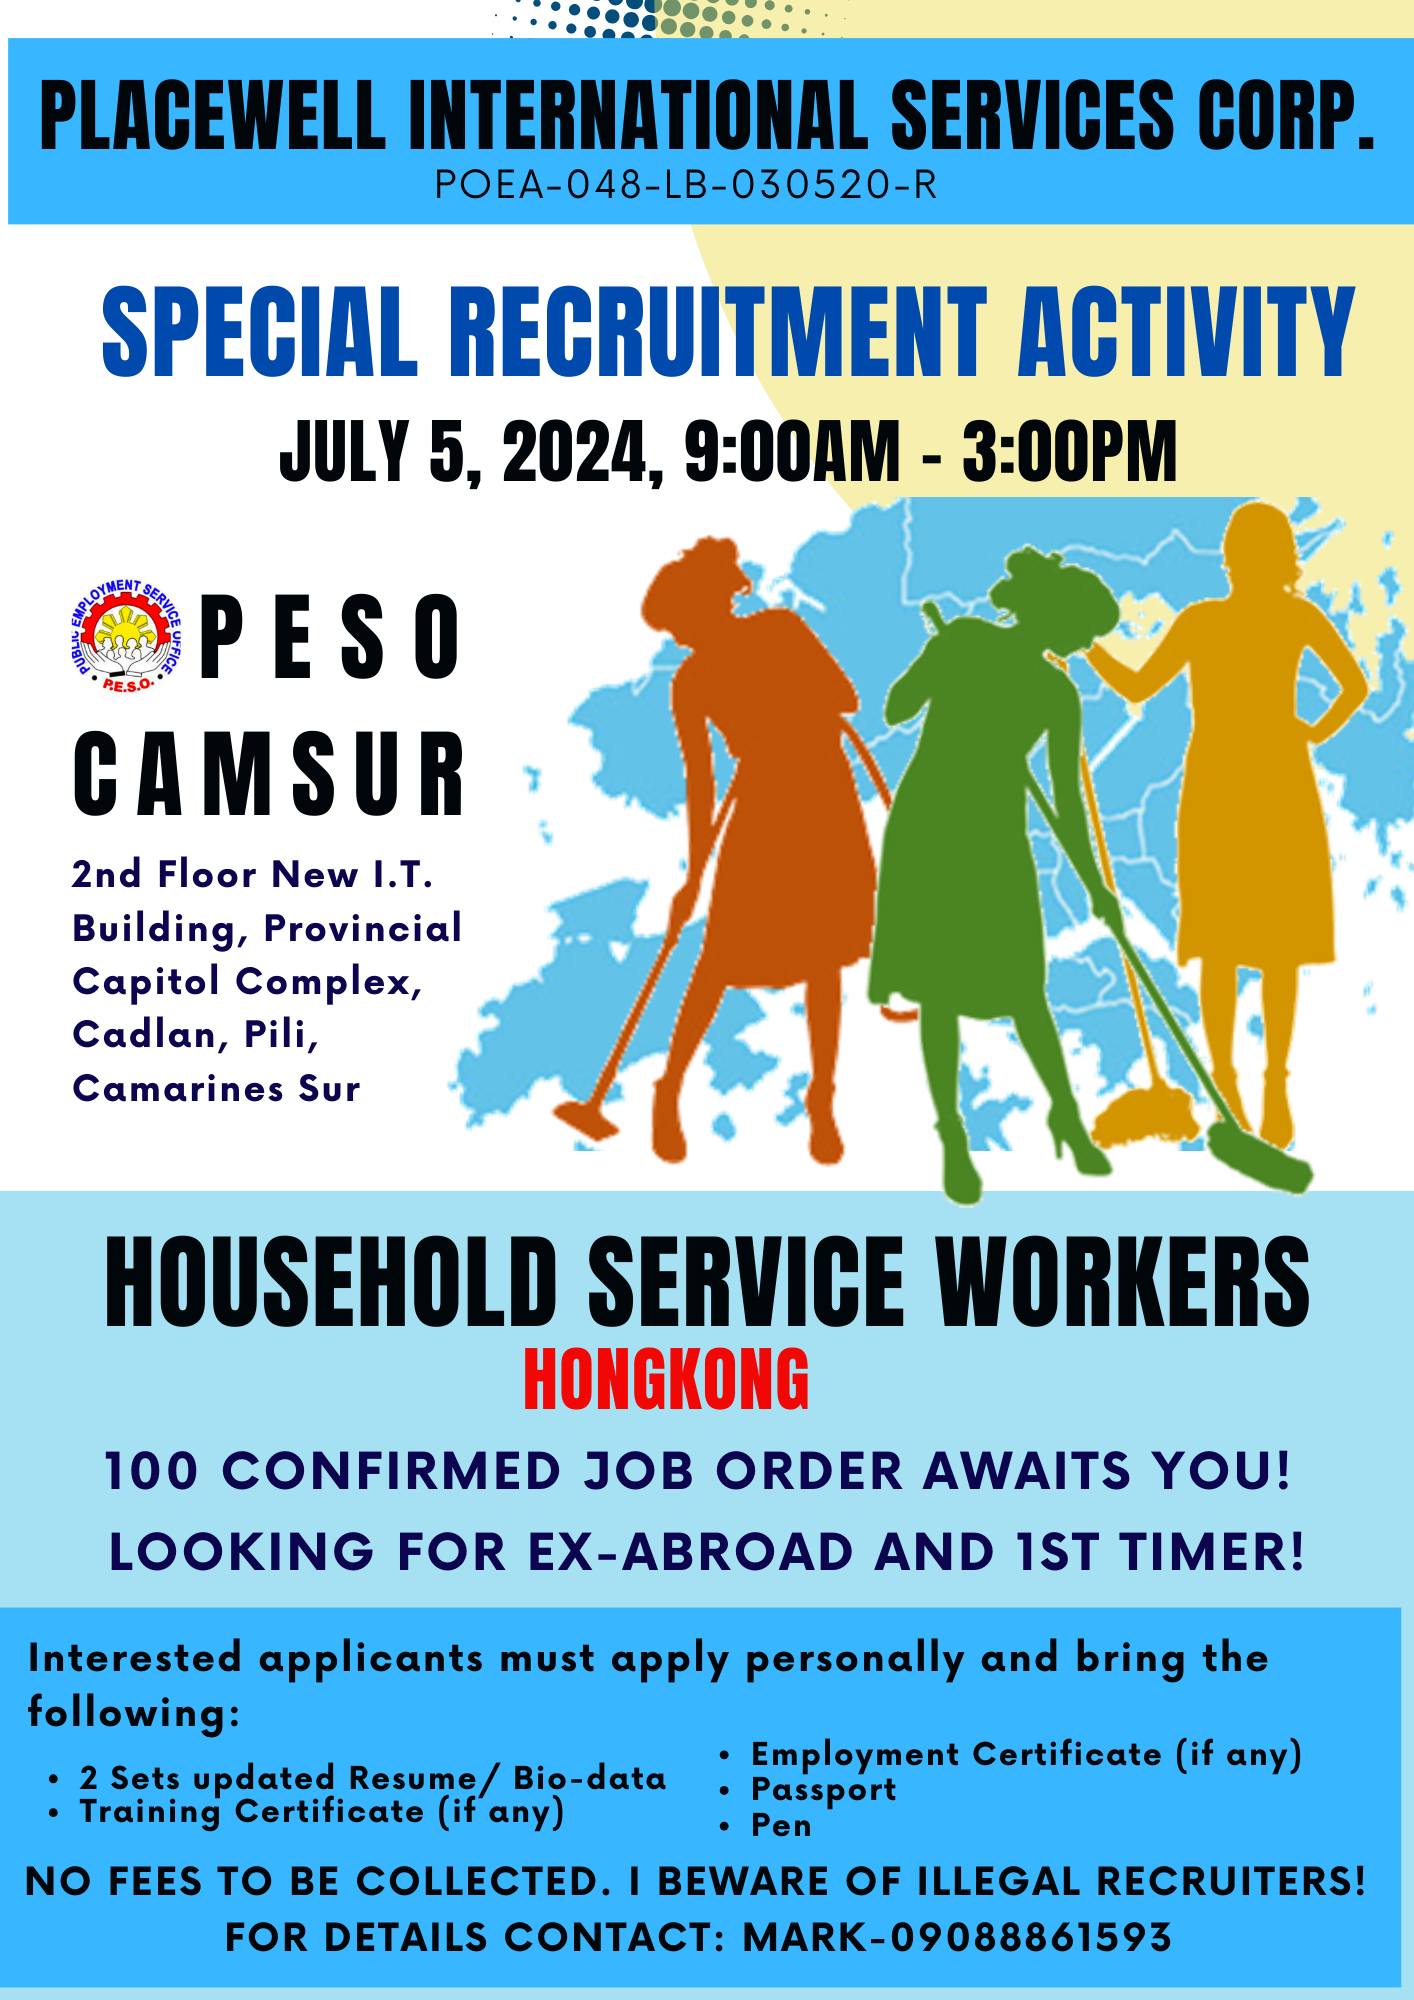 Inviting job seekers to attend the SPECIAL RECRUITMENT ACTIVITY (SRA) of PLACEWELL INTERNATIONAL SERVICES CORP